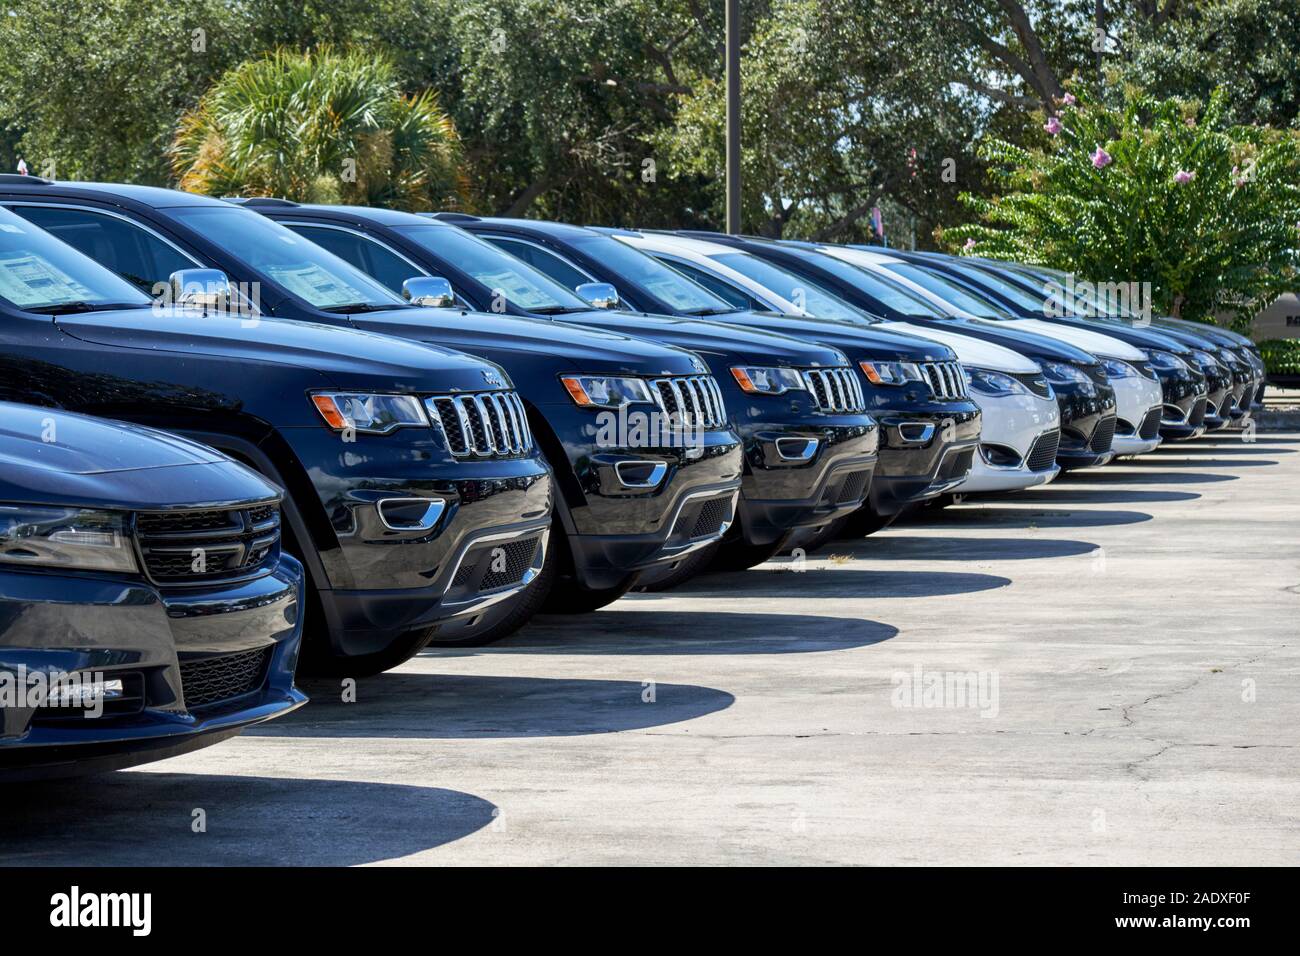 jeep suv and cars new vehicles for sale at a car dealers in florida usa Stock Photo